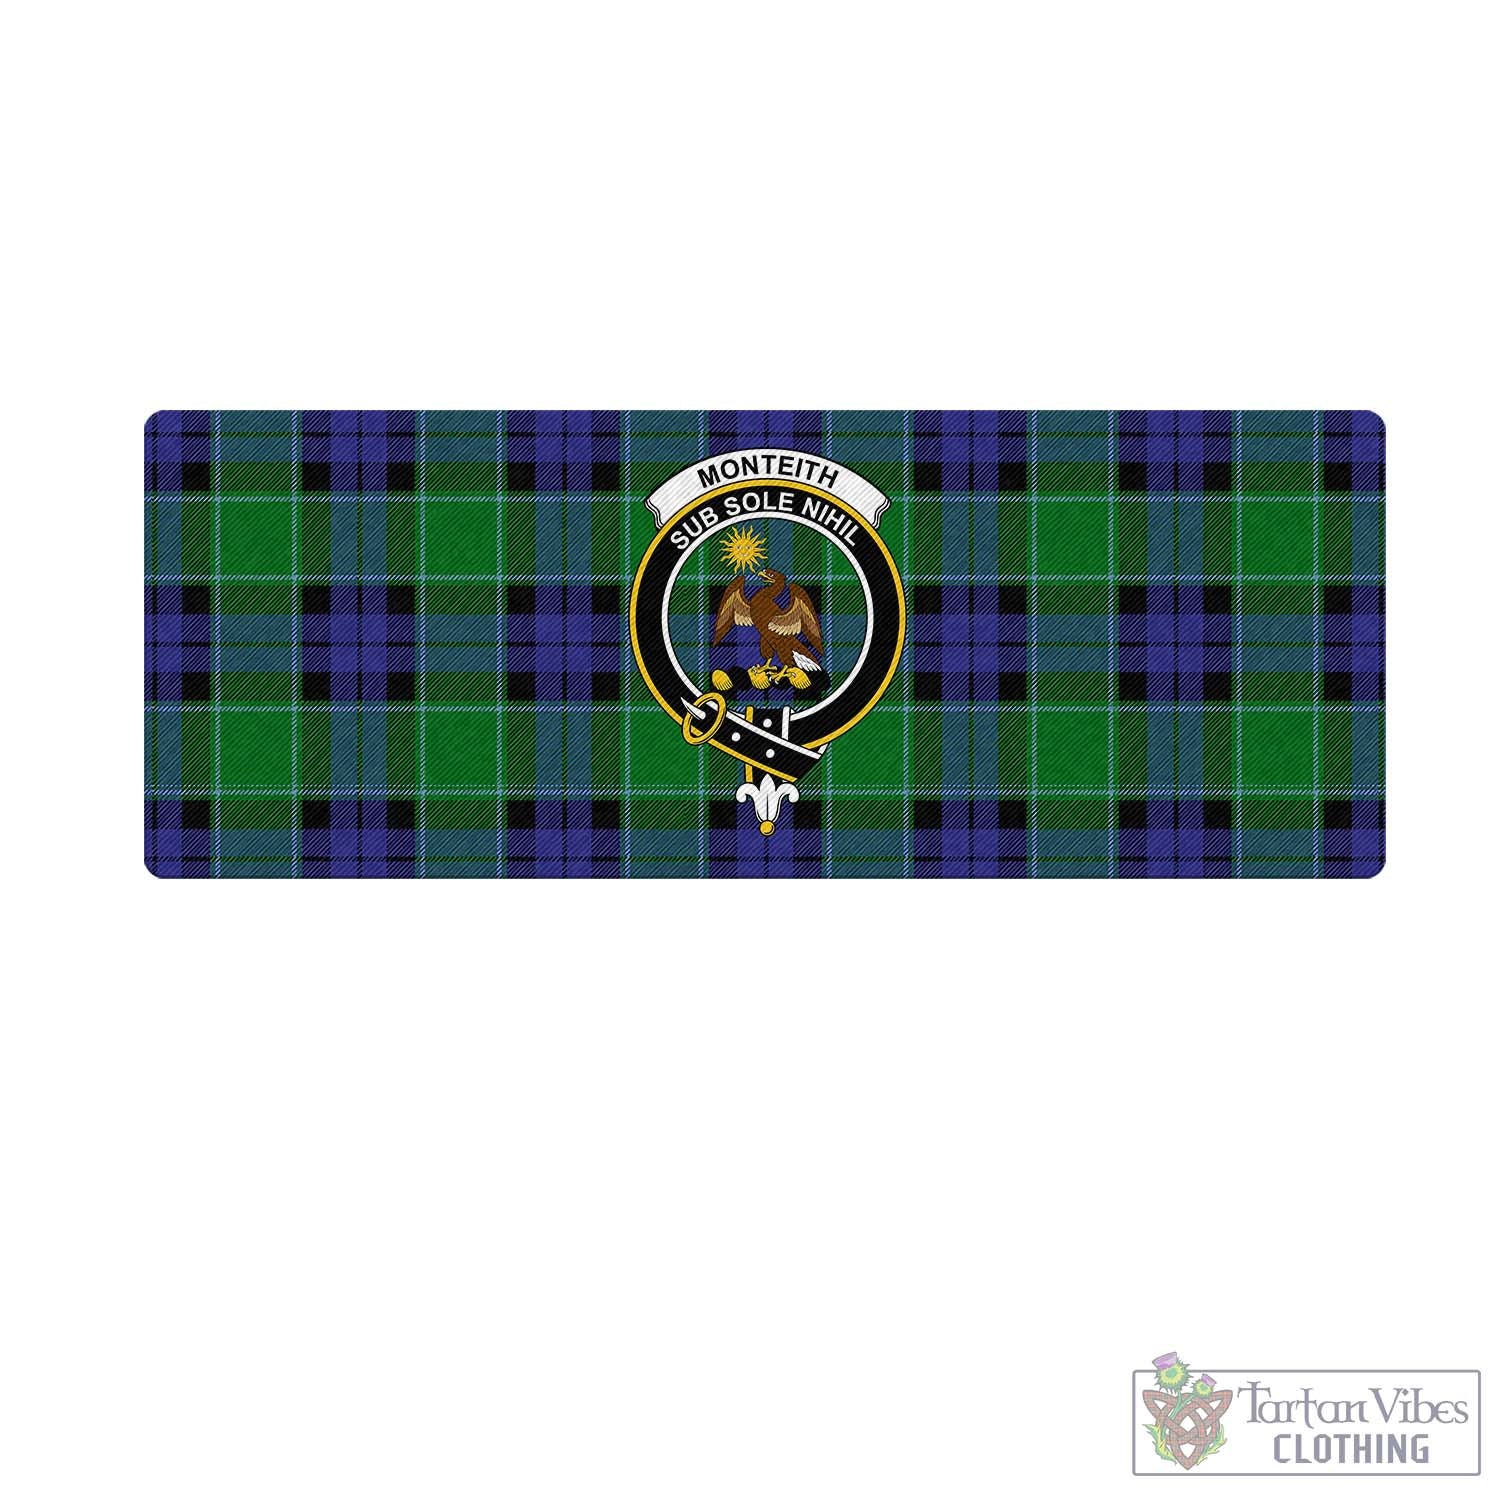 Tartan Vibes Clothing Monteith Tartan Mouse Pad with Family Crest